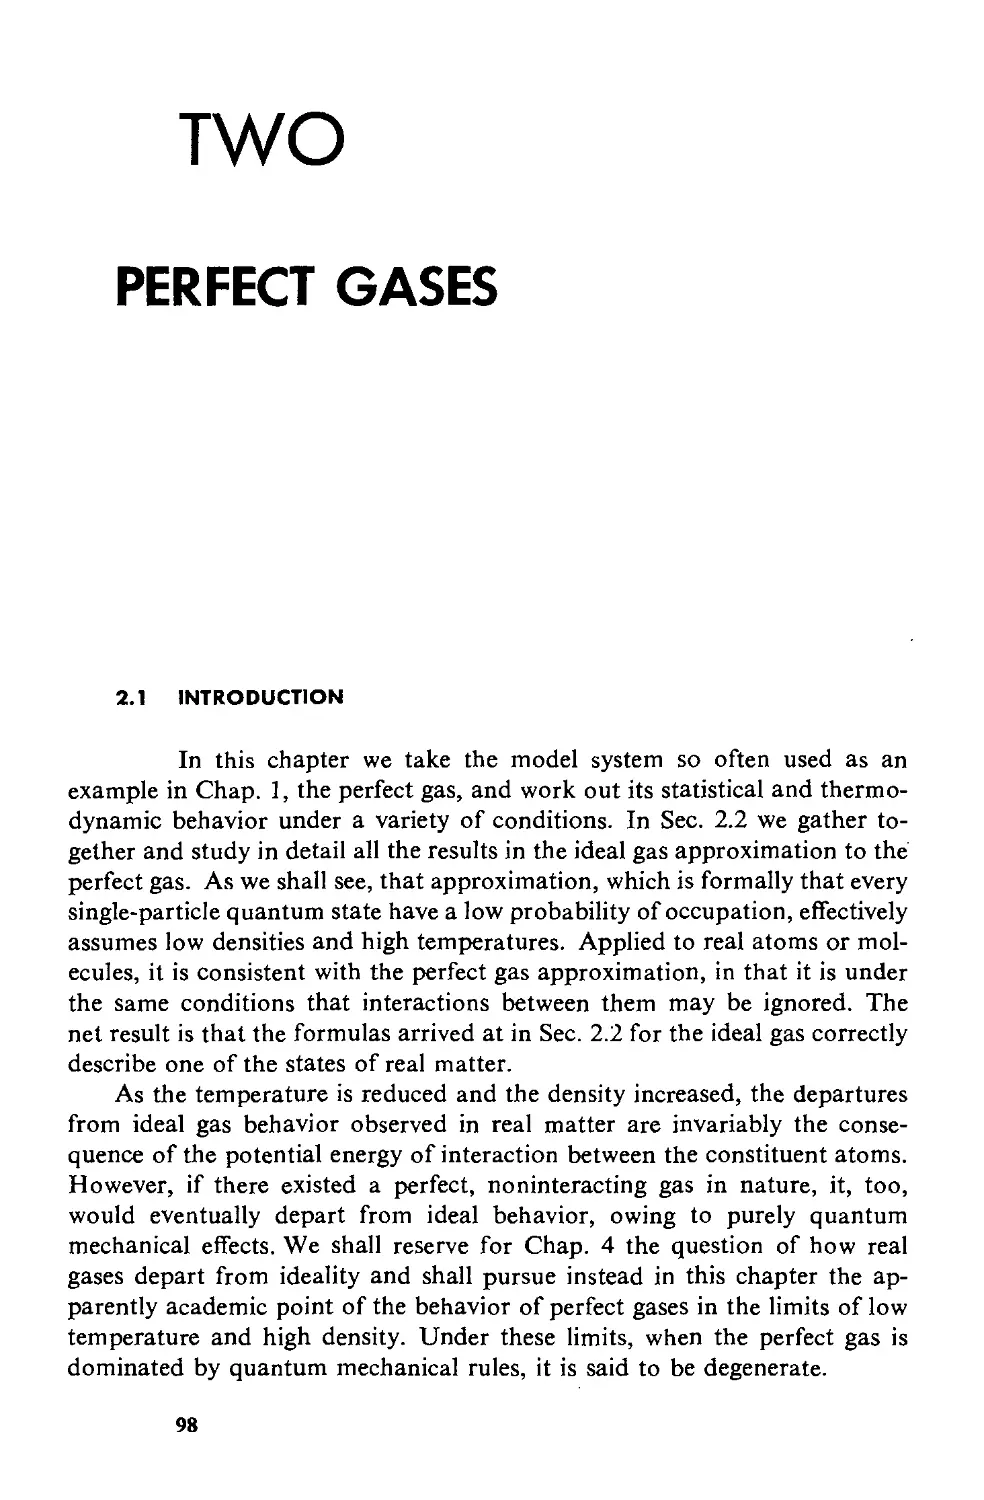 2. Perfect Gases